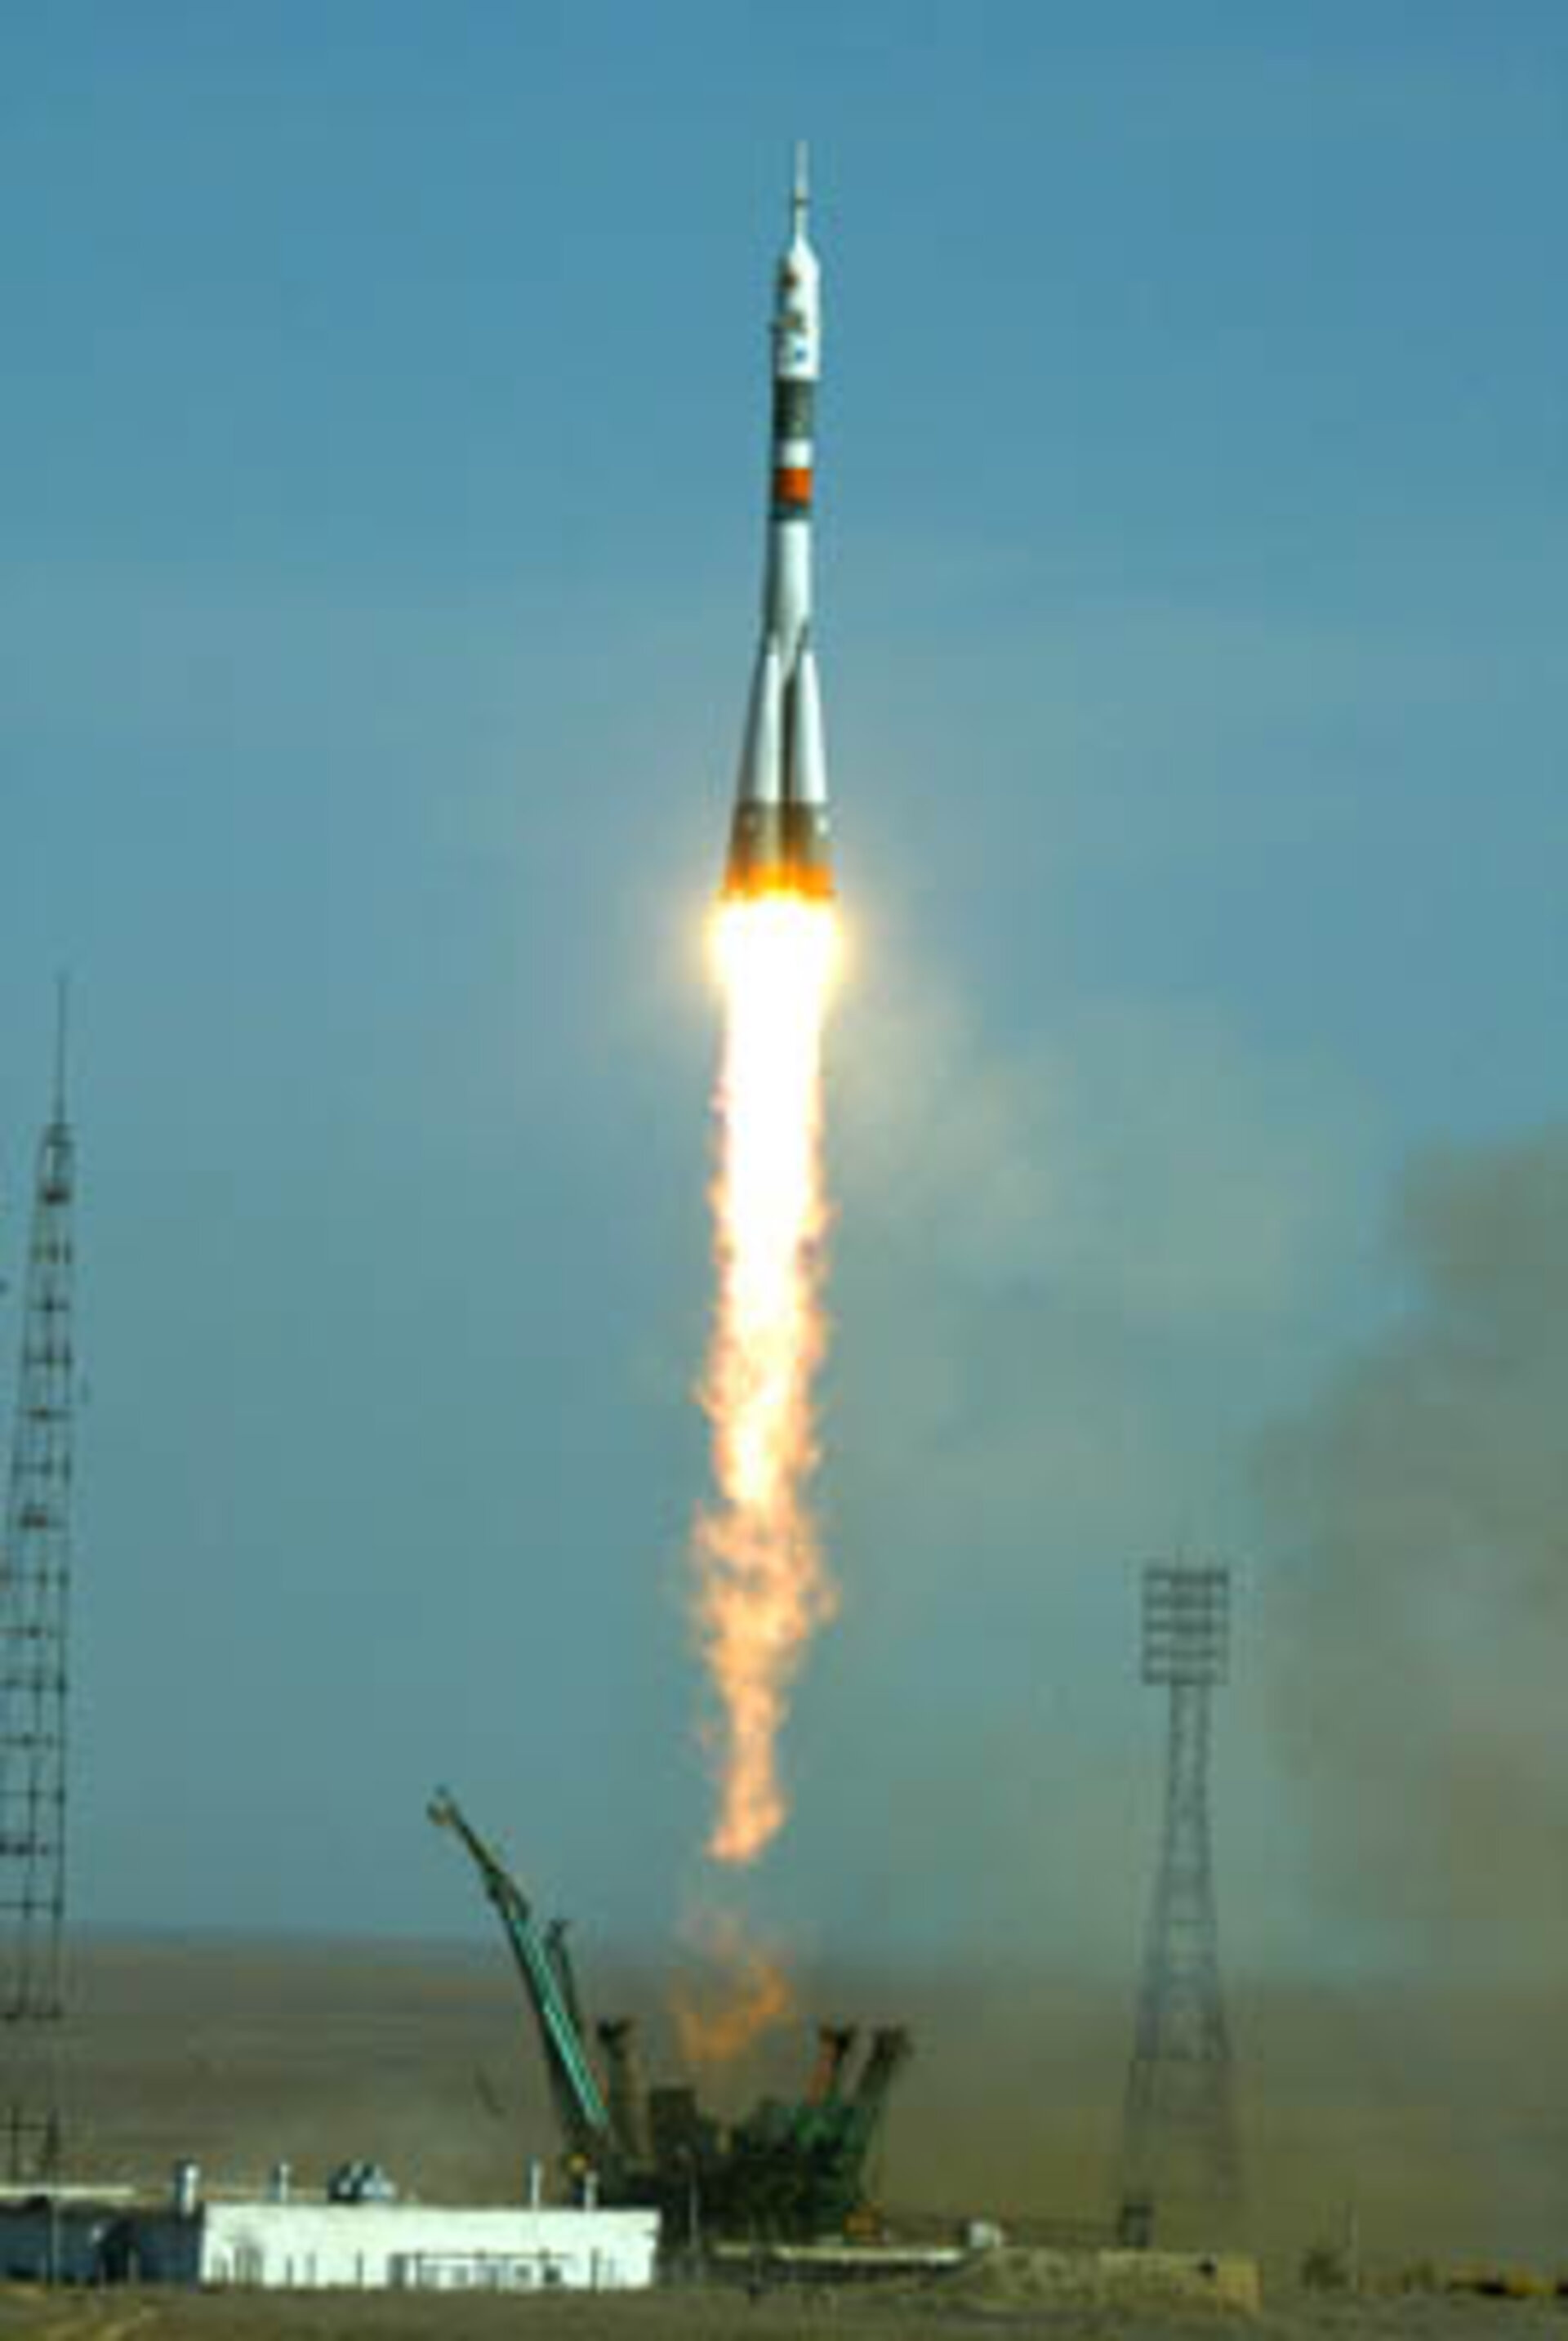 Launch of the Cervantes Mission at 07:38 CEST from Baikonur Cosmodrome, Kazahkstan